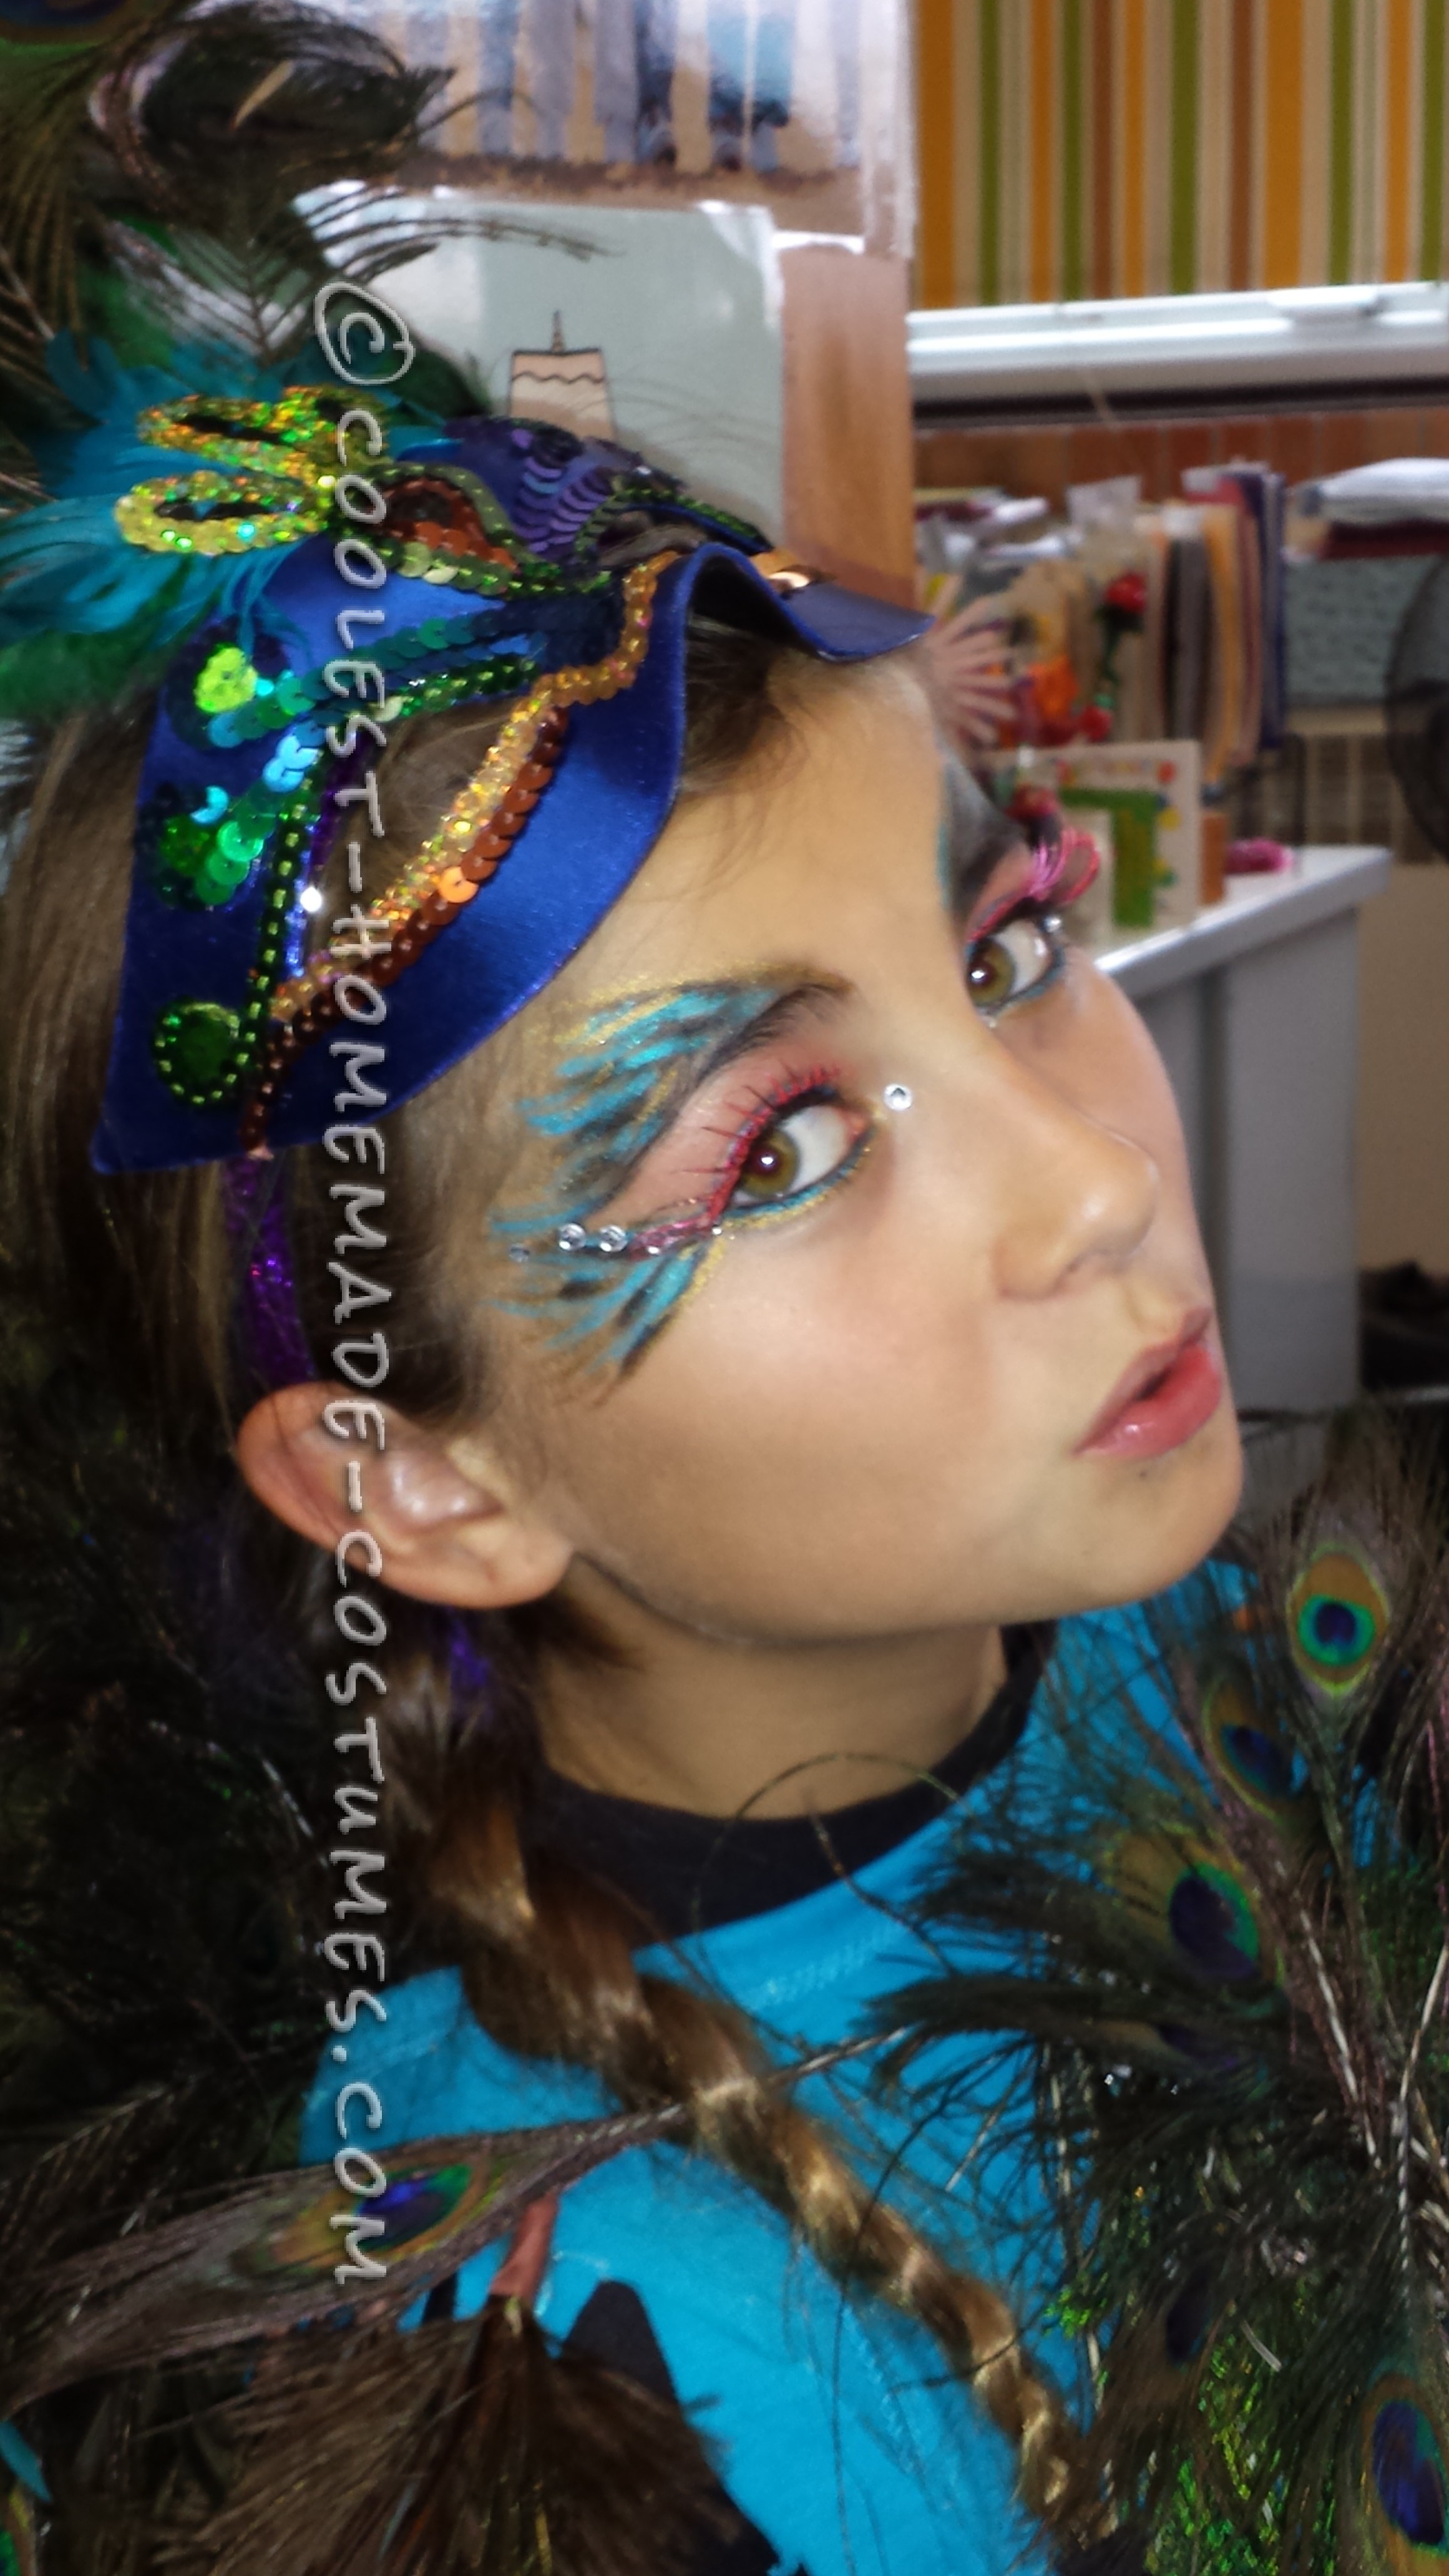 Beautiful Homeamde Peacock Costume for a Girl